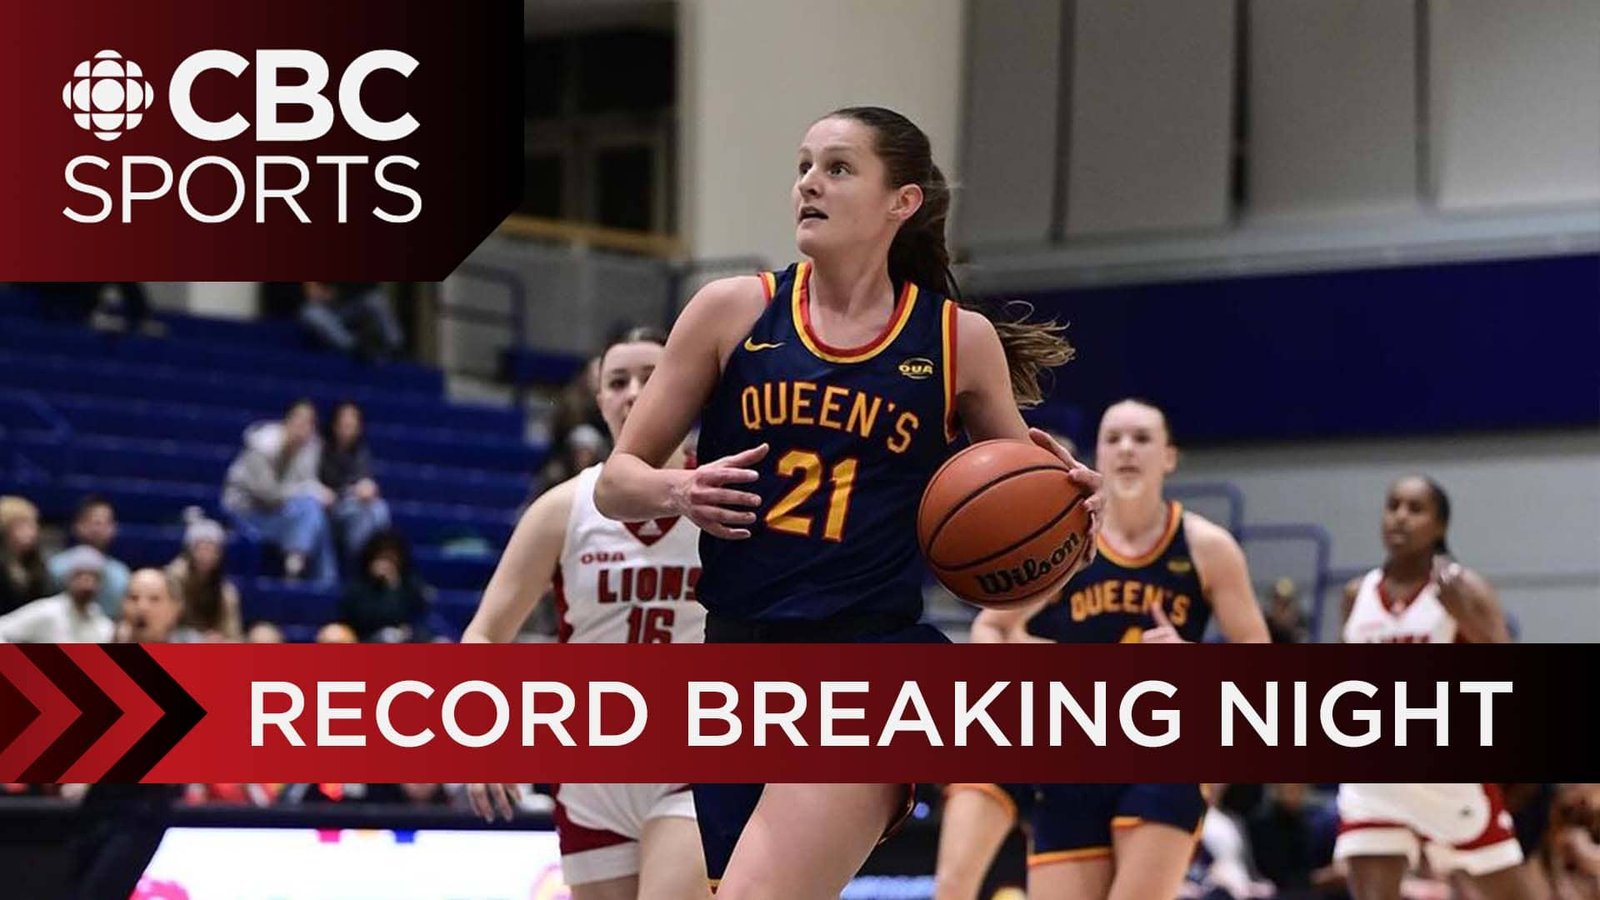 Queen's Gaels basketball star Julia Chadwick breaks 15-year-old basketball scoring record